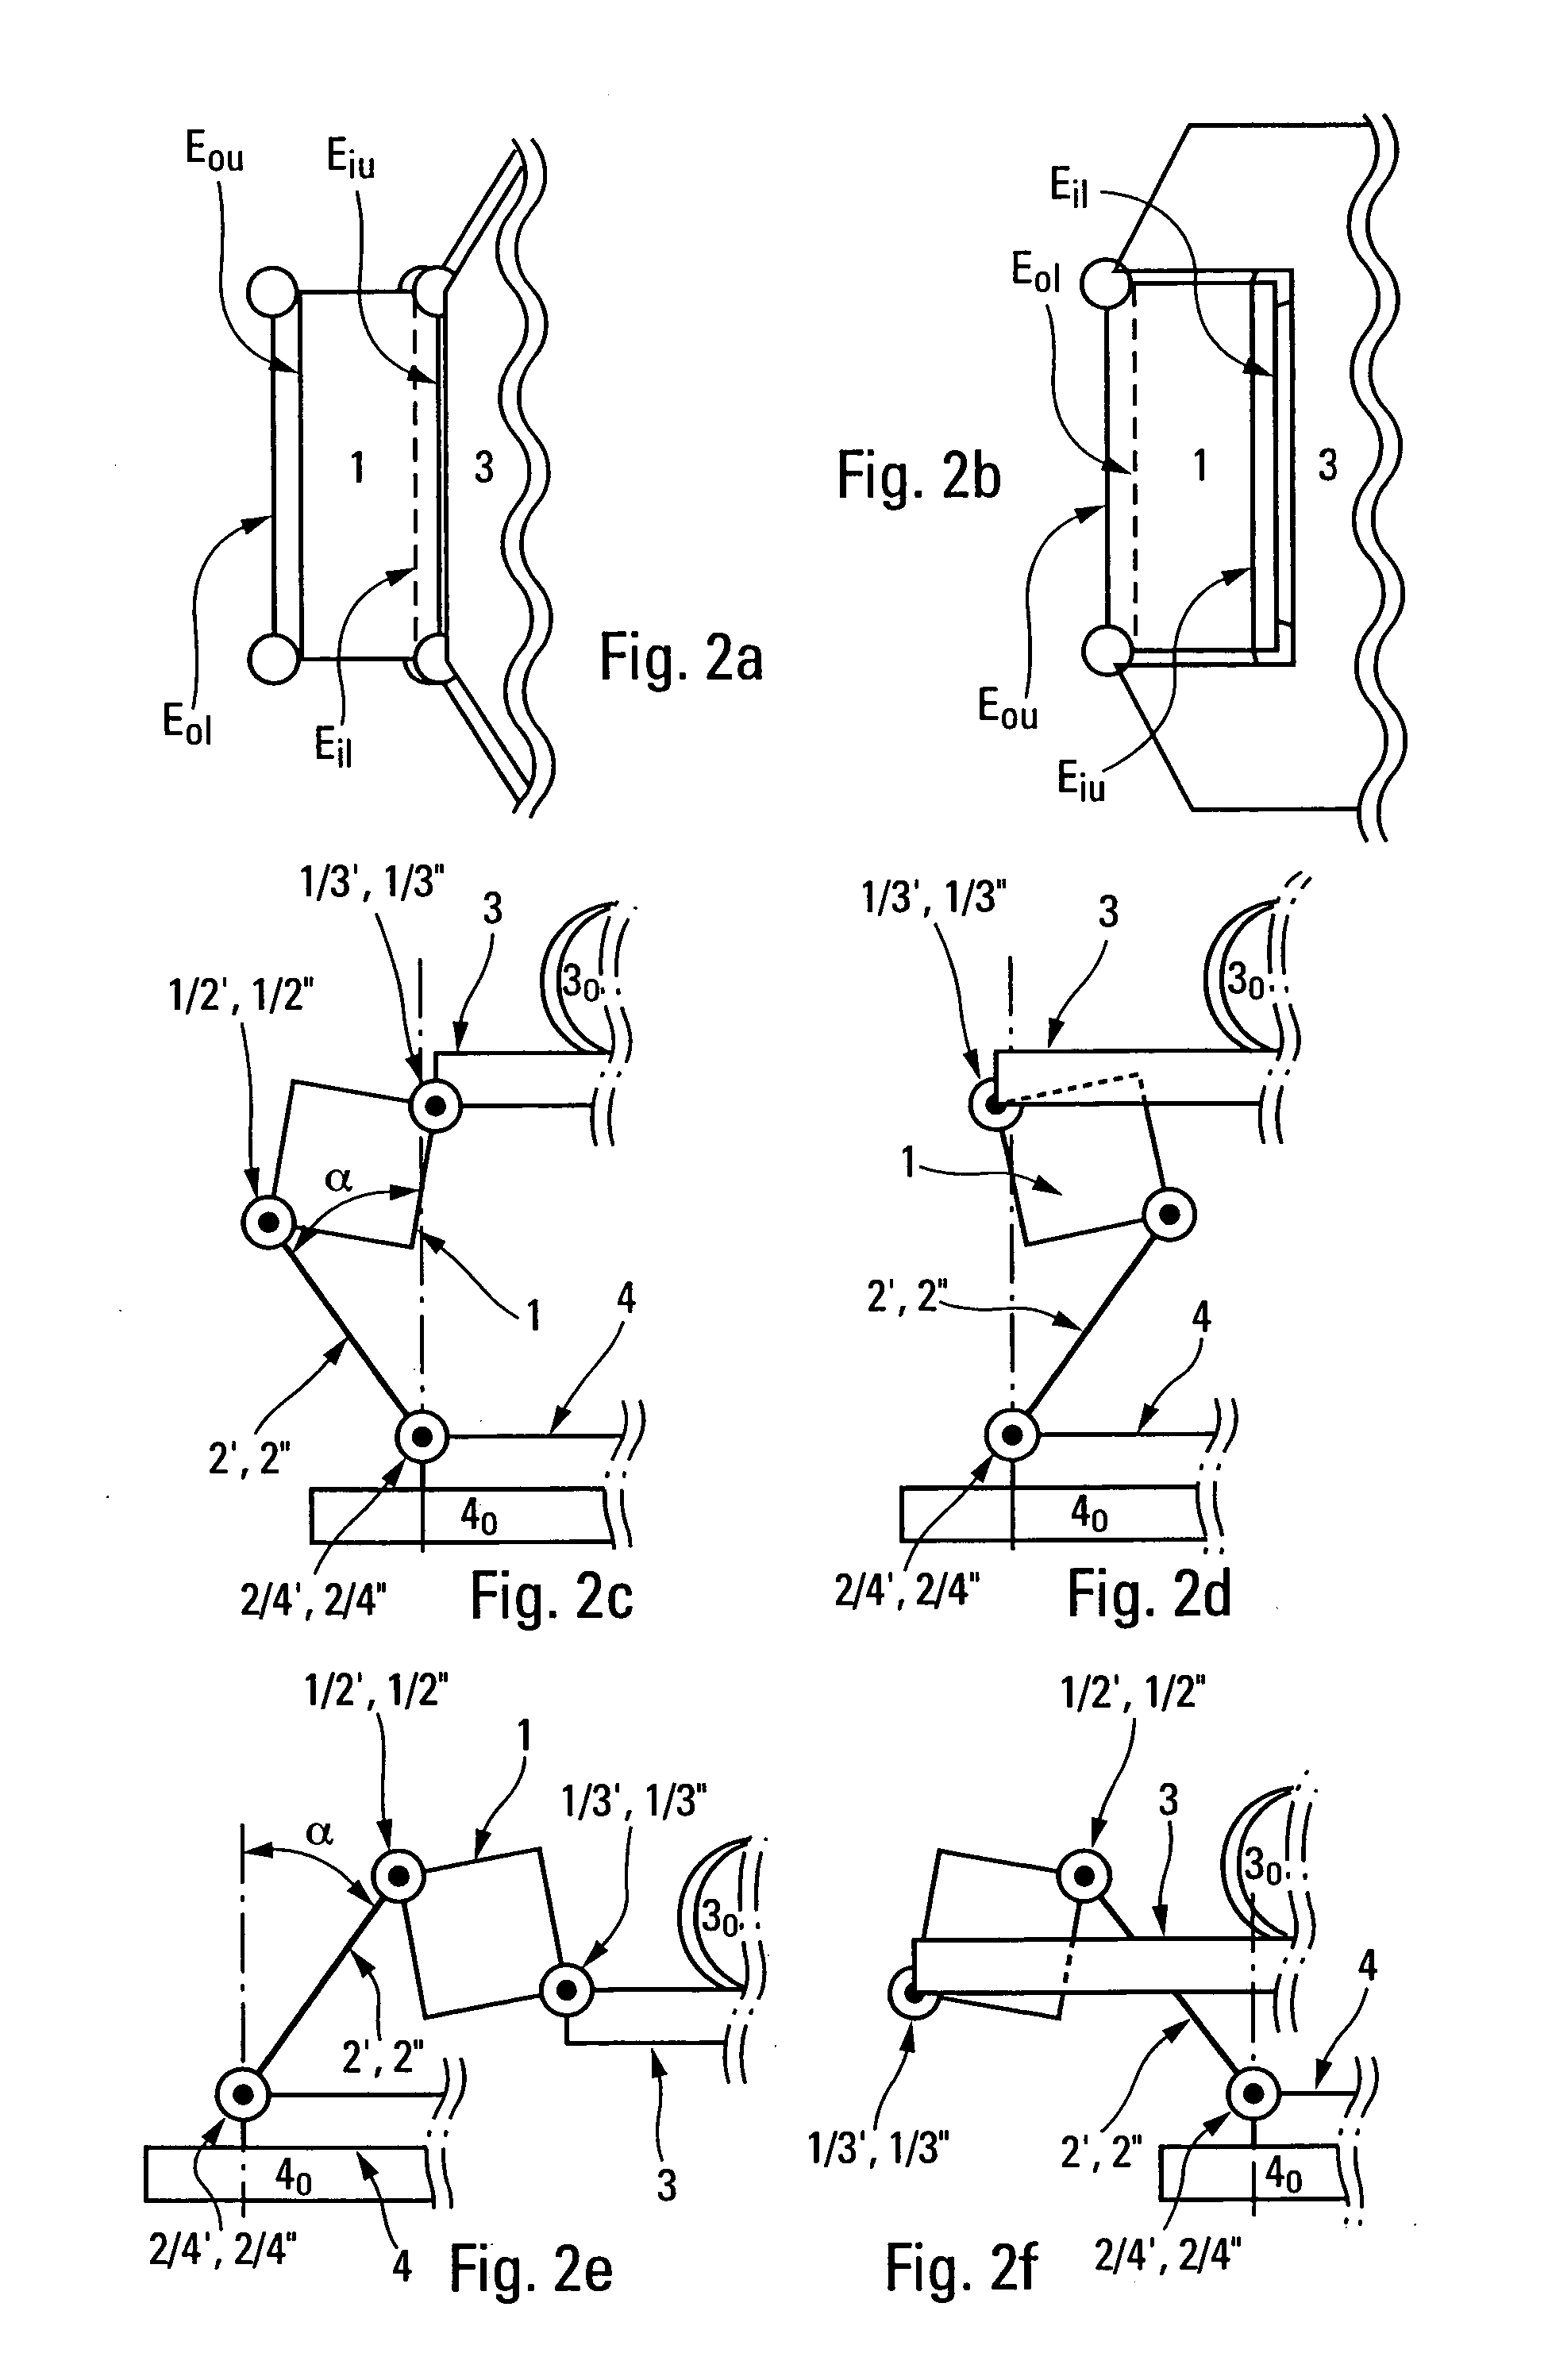 Elementary and complex coupling devices, and their use